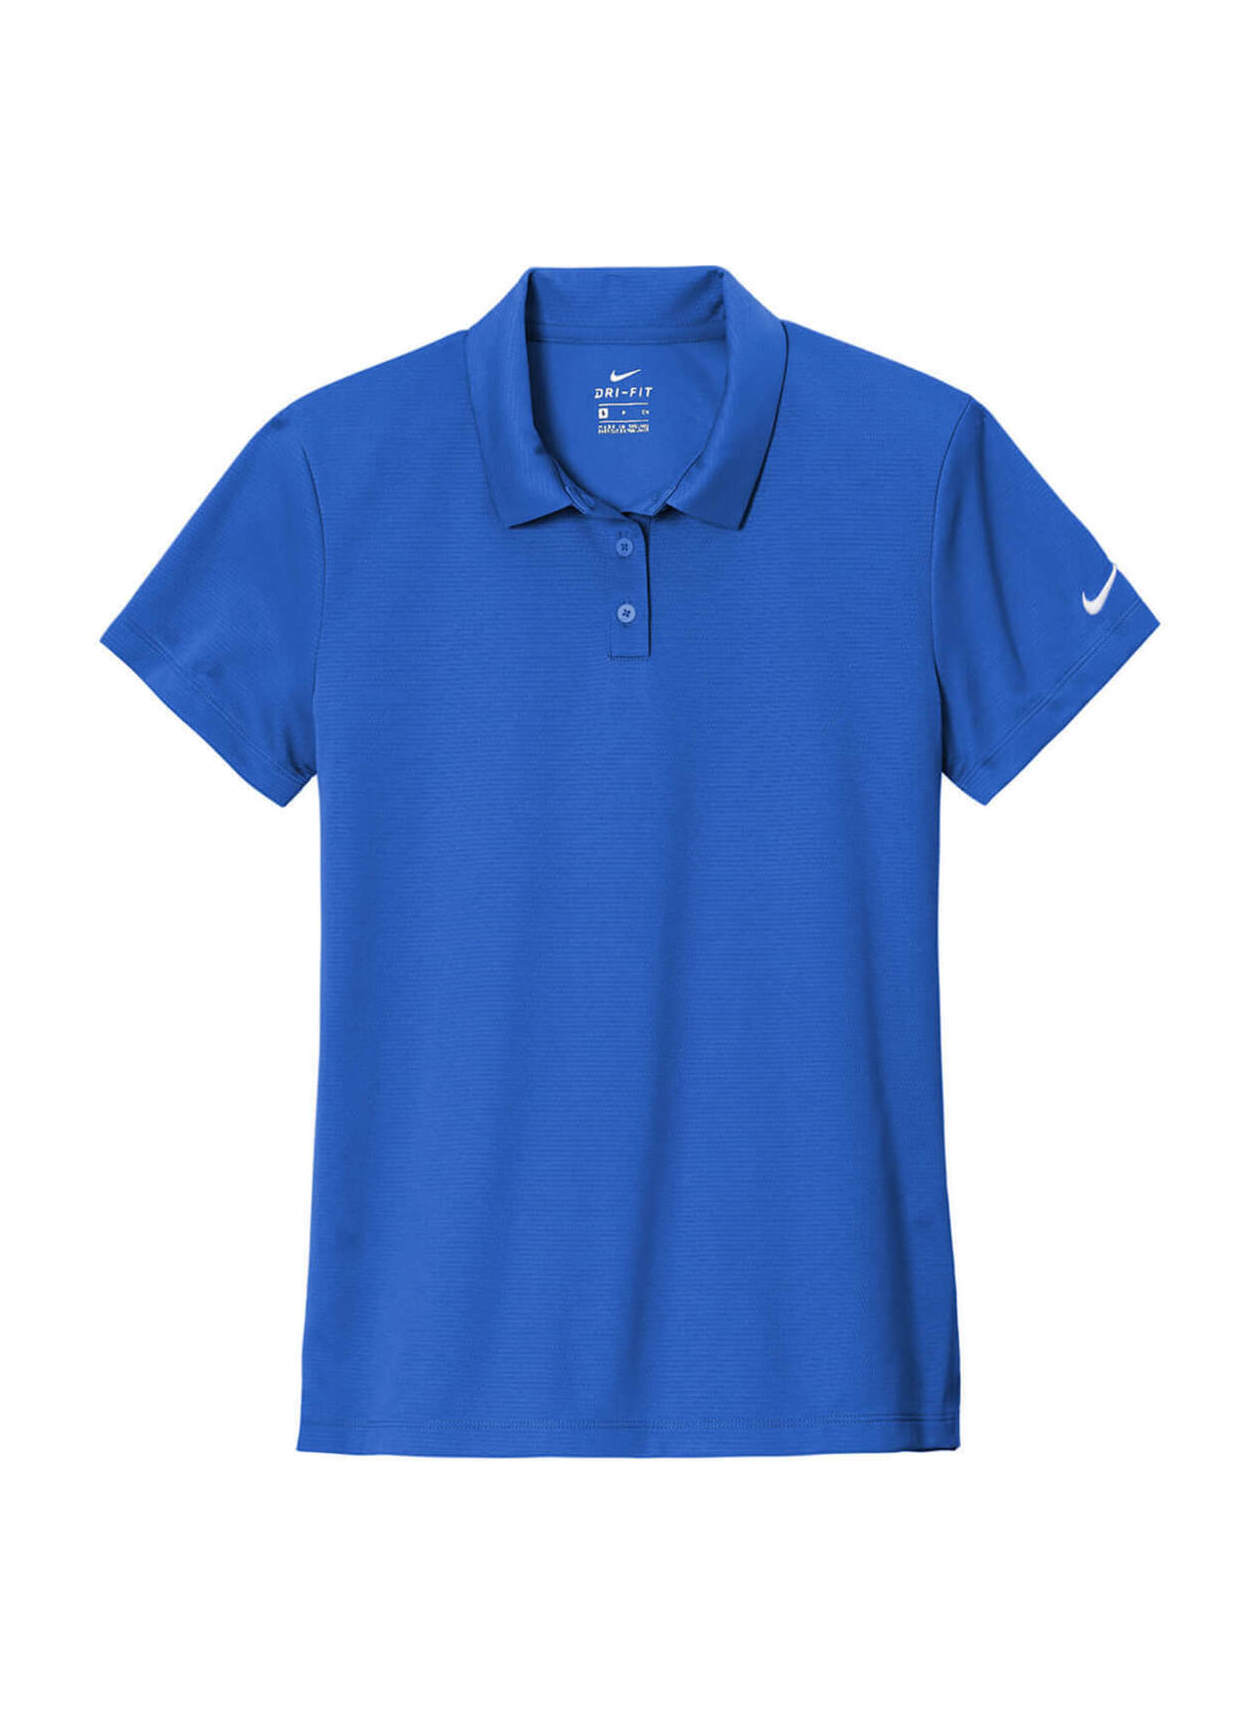 Nike Women's Dry Essential Solid Polo Game Royal